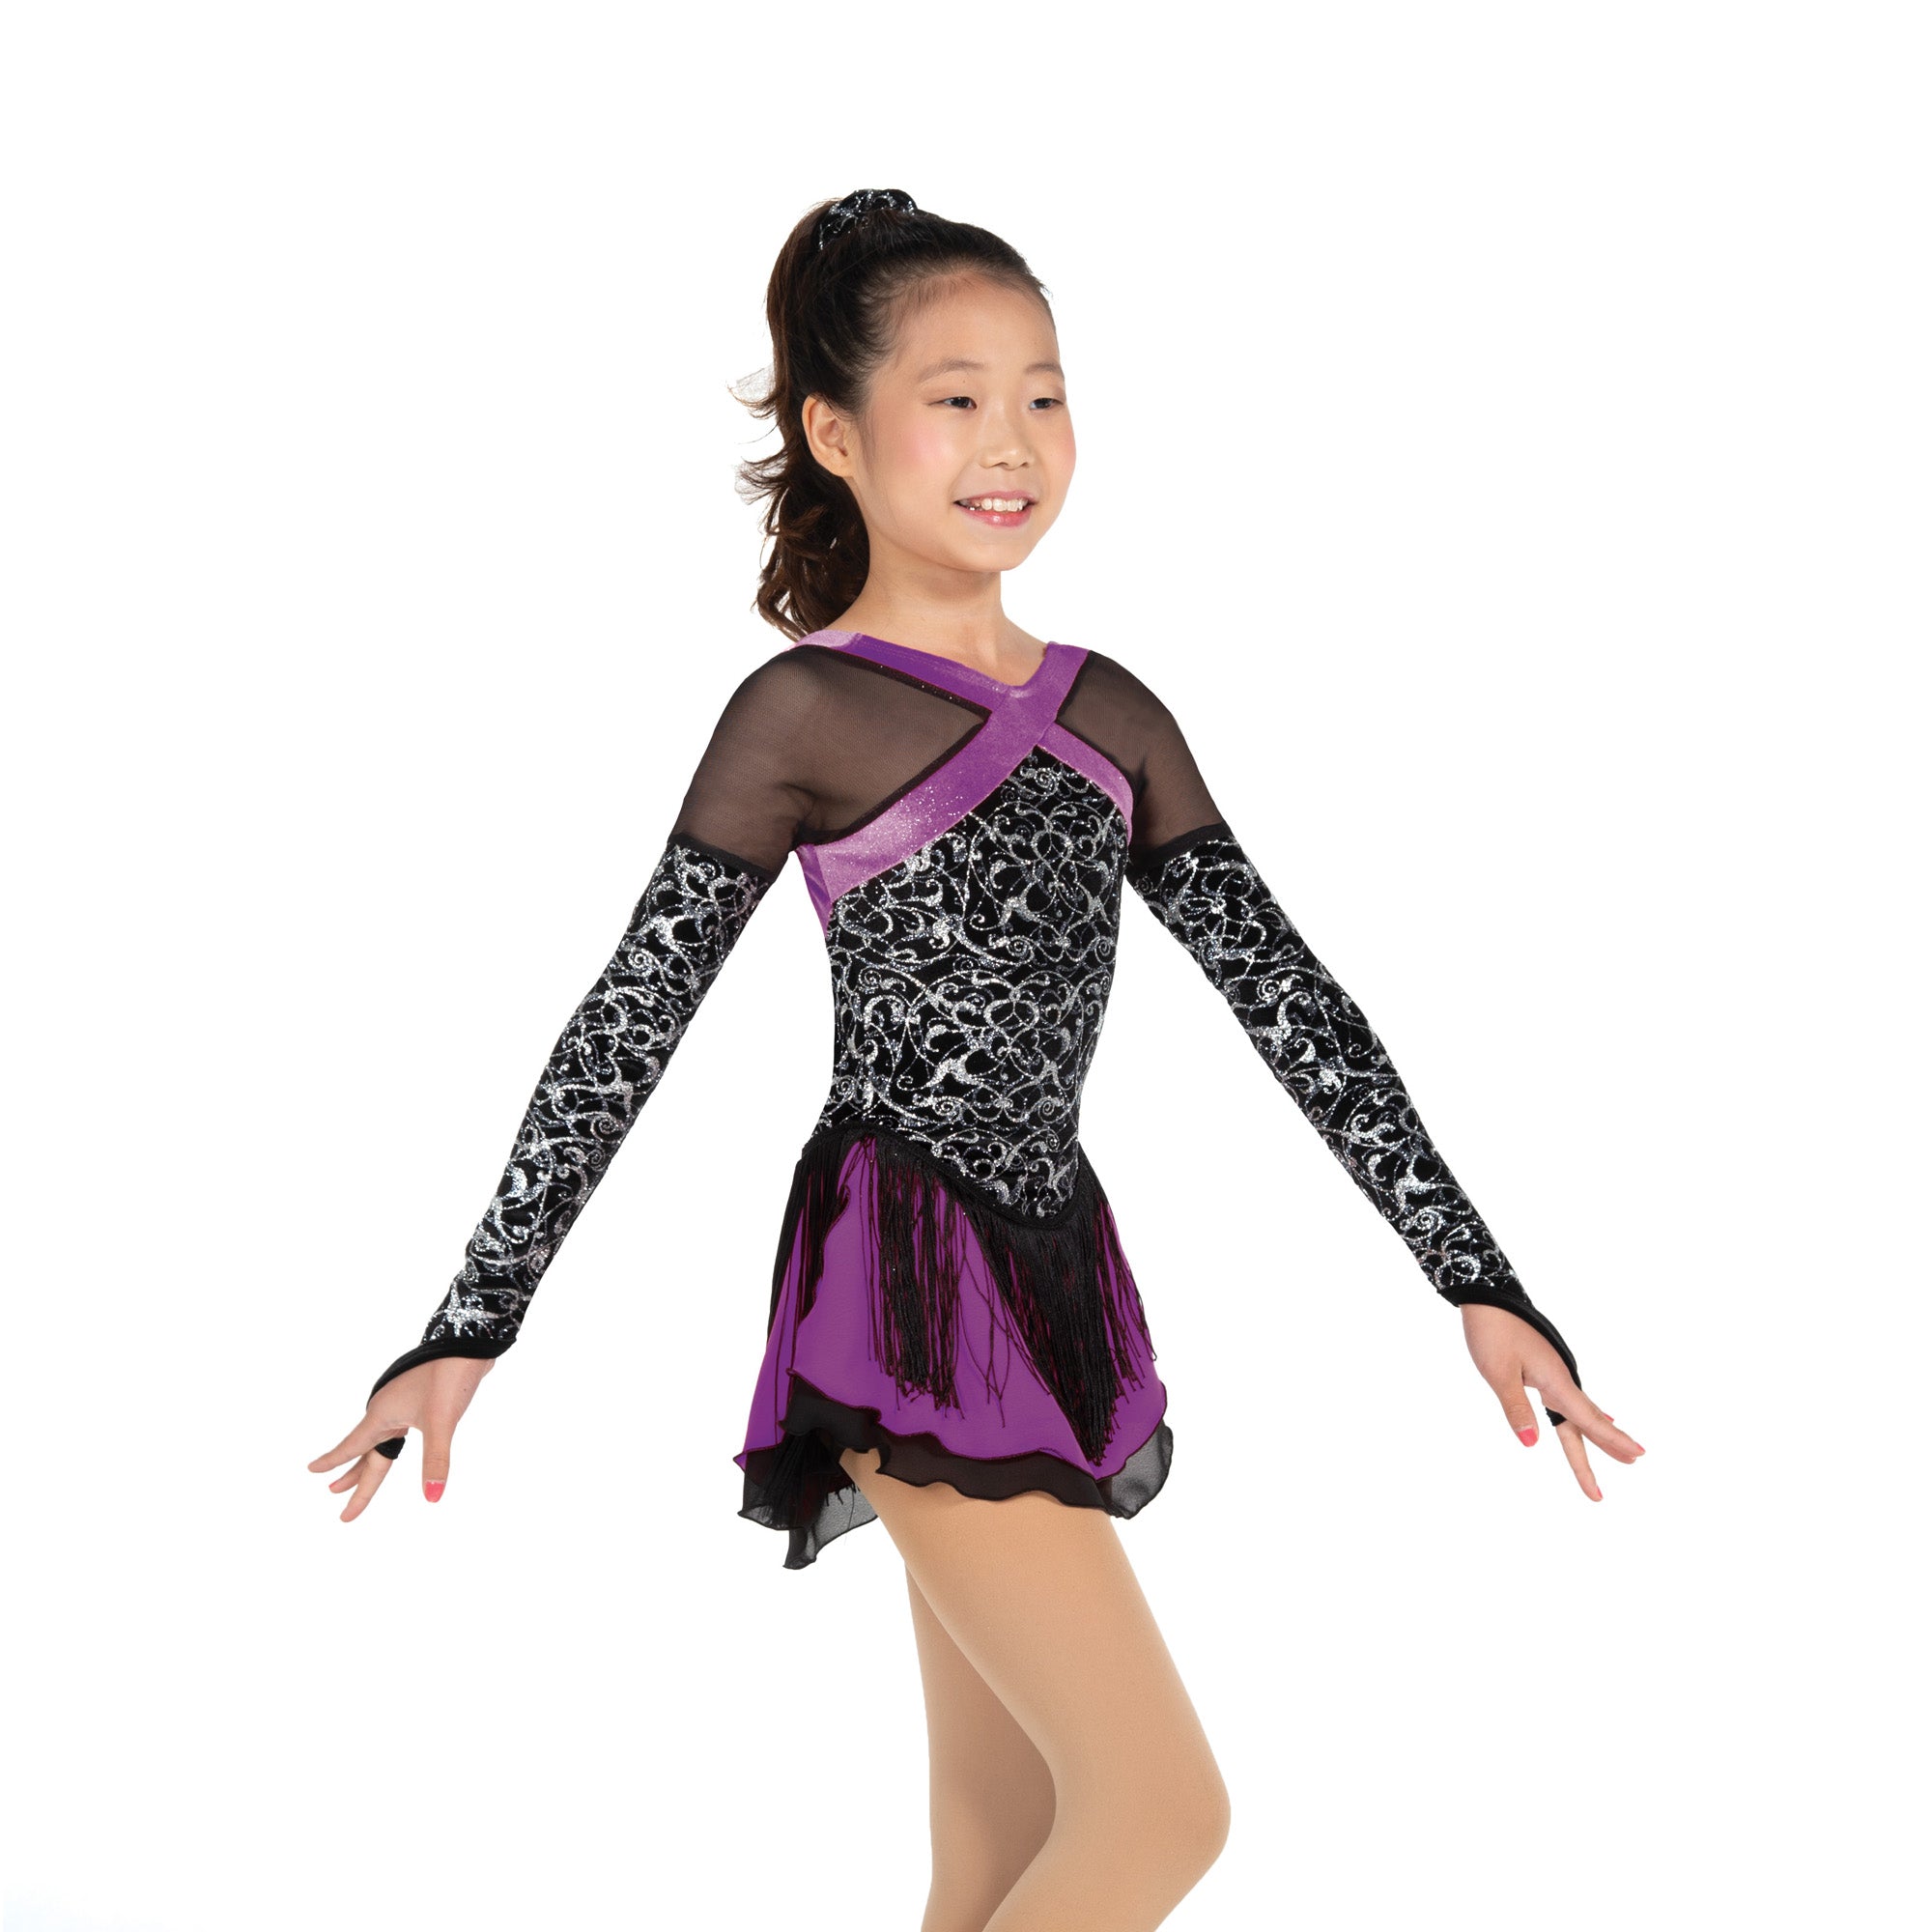 134 Wish Upon a Swish Skating Dress in Violet by Jerry's